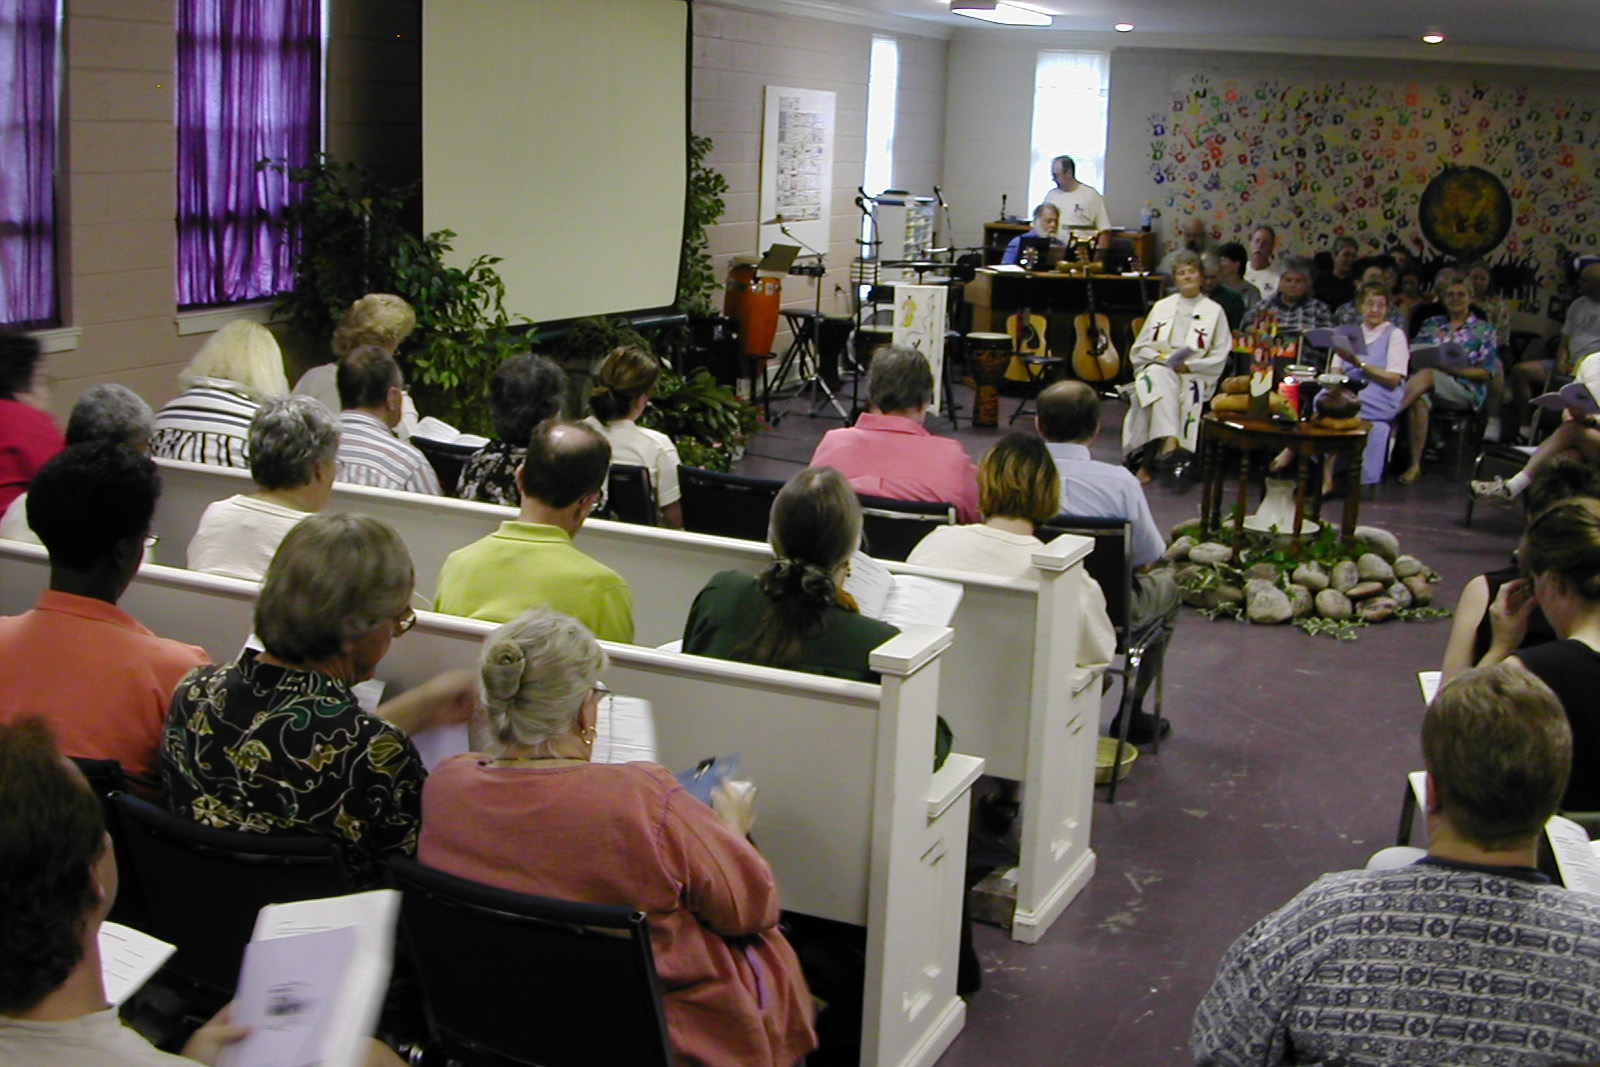 A worship service at Community of Hope church in Tulsa, Oklahoma, in the 1990s. Photo courtesy of Leslie Penrose